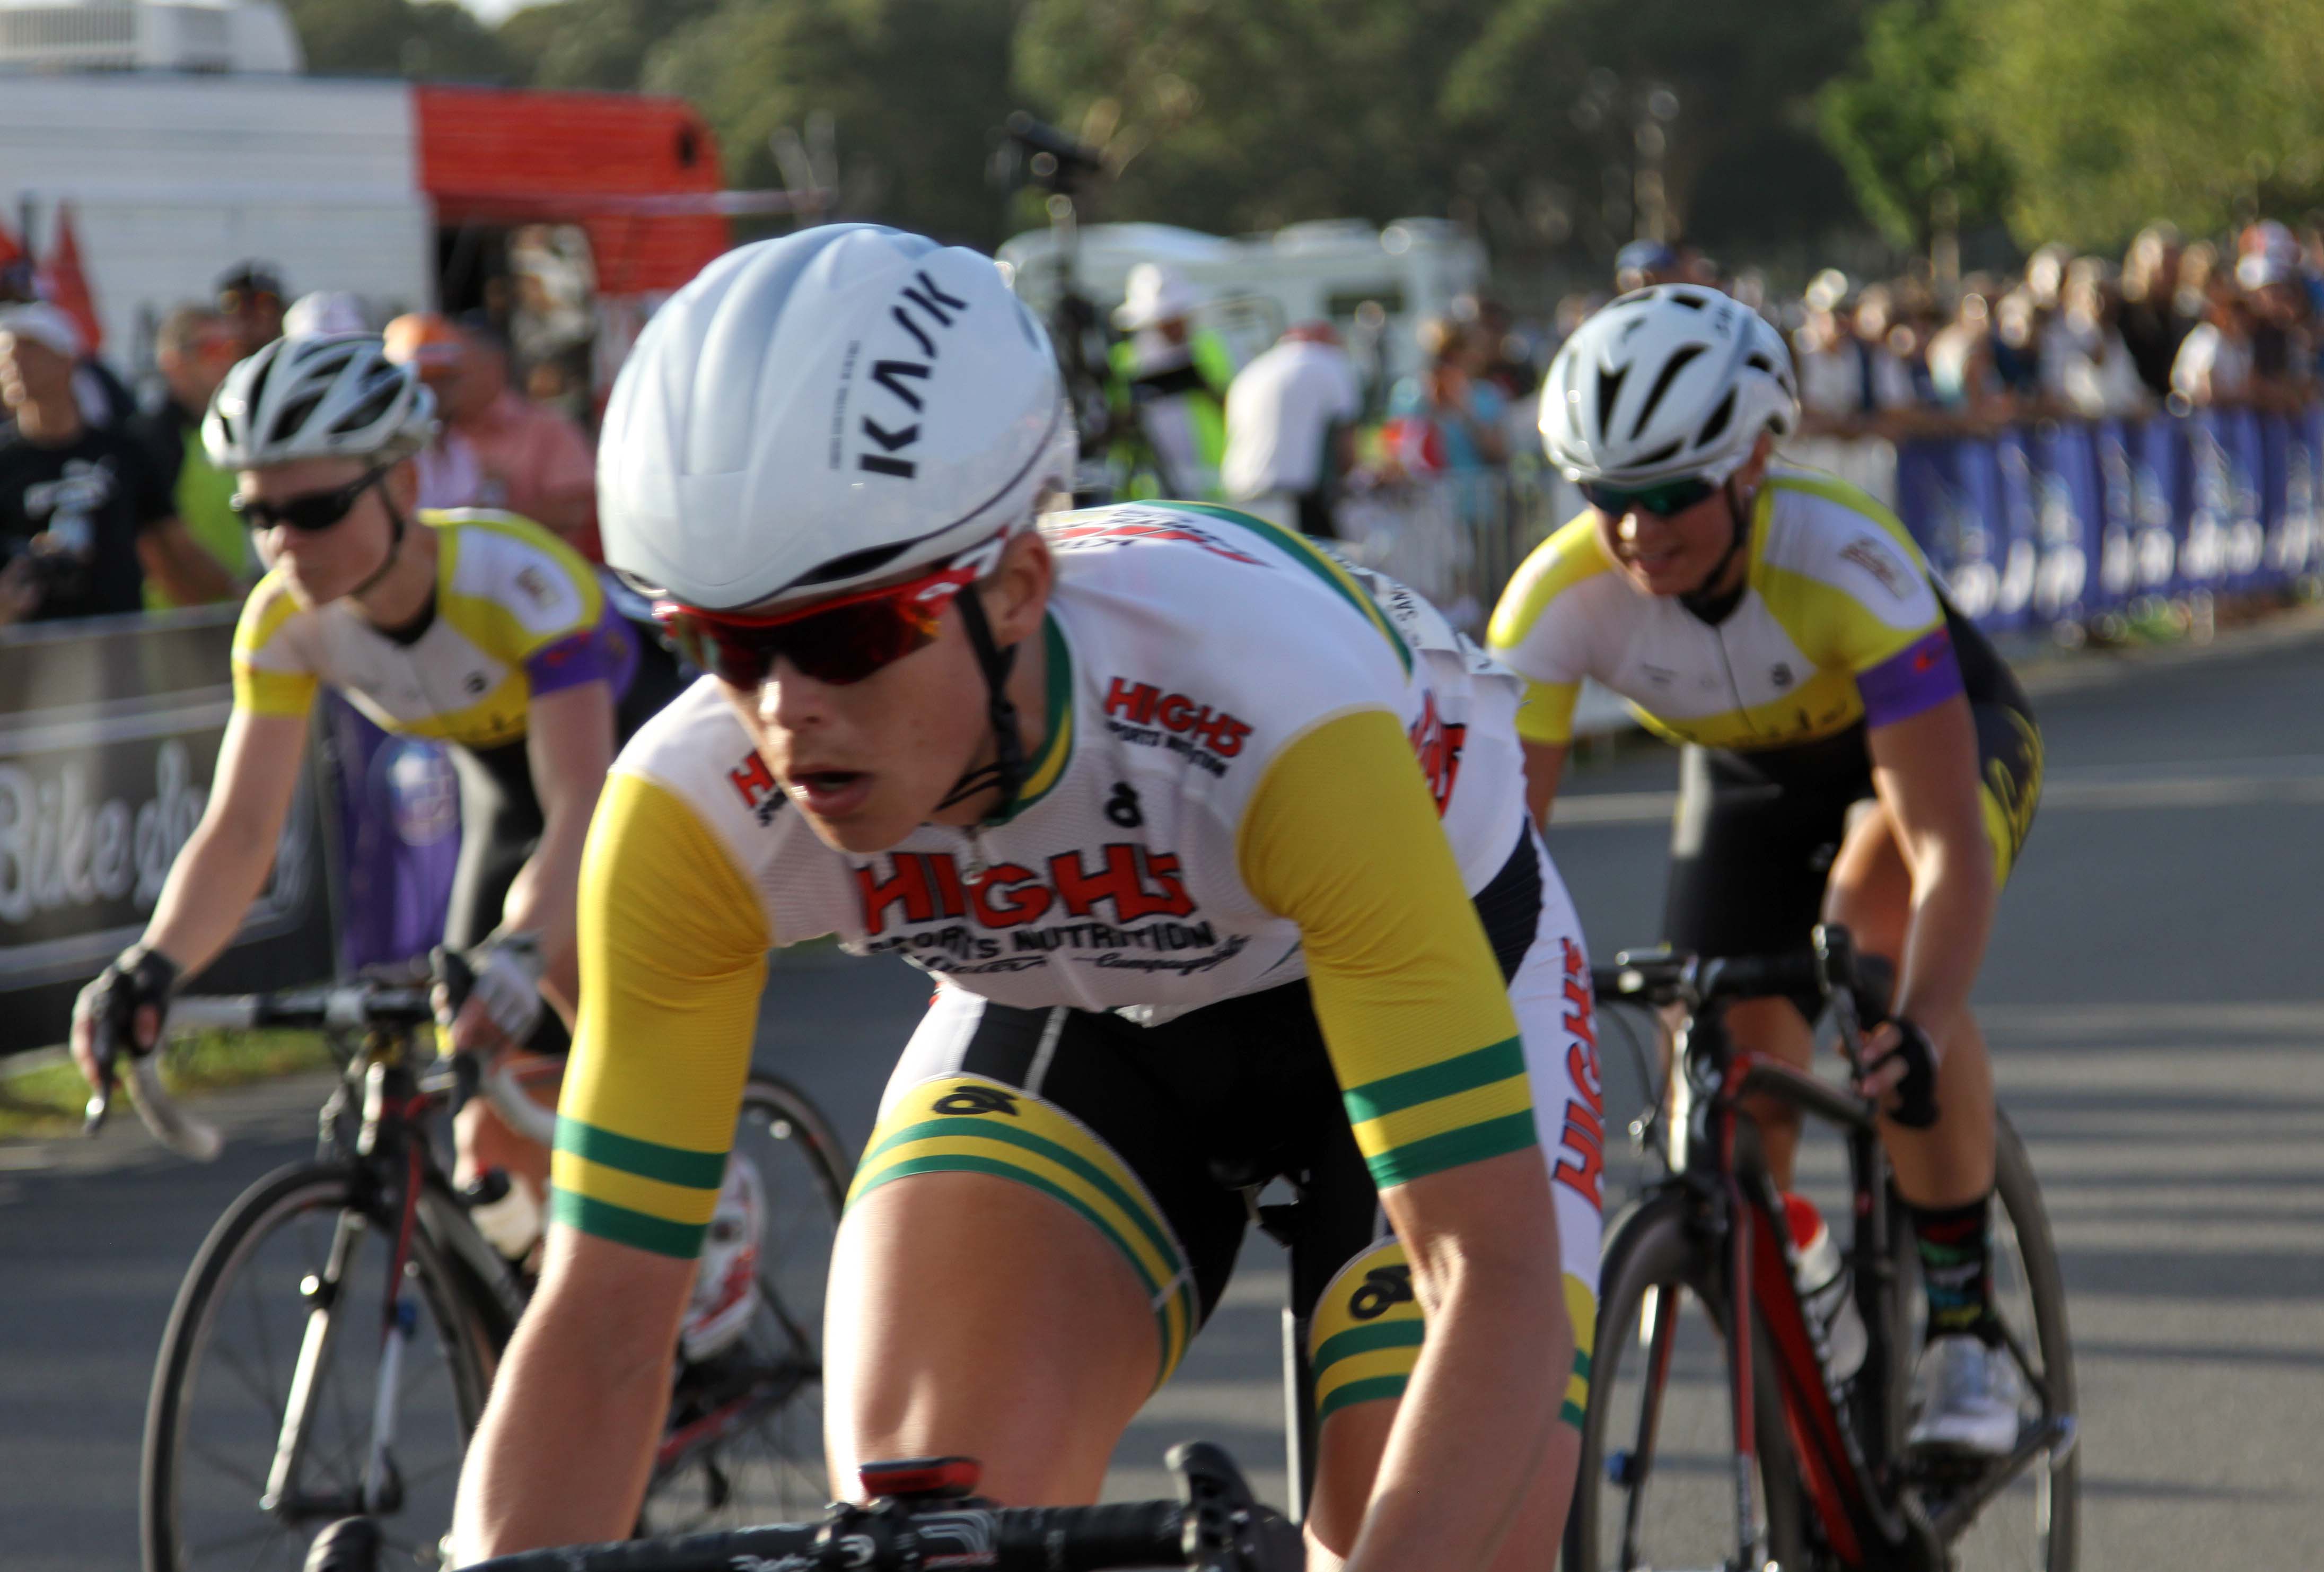 Female pro cyclist Kimberley Wells focused on a huge year in 2016 -